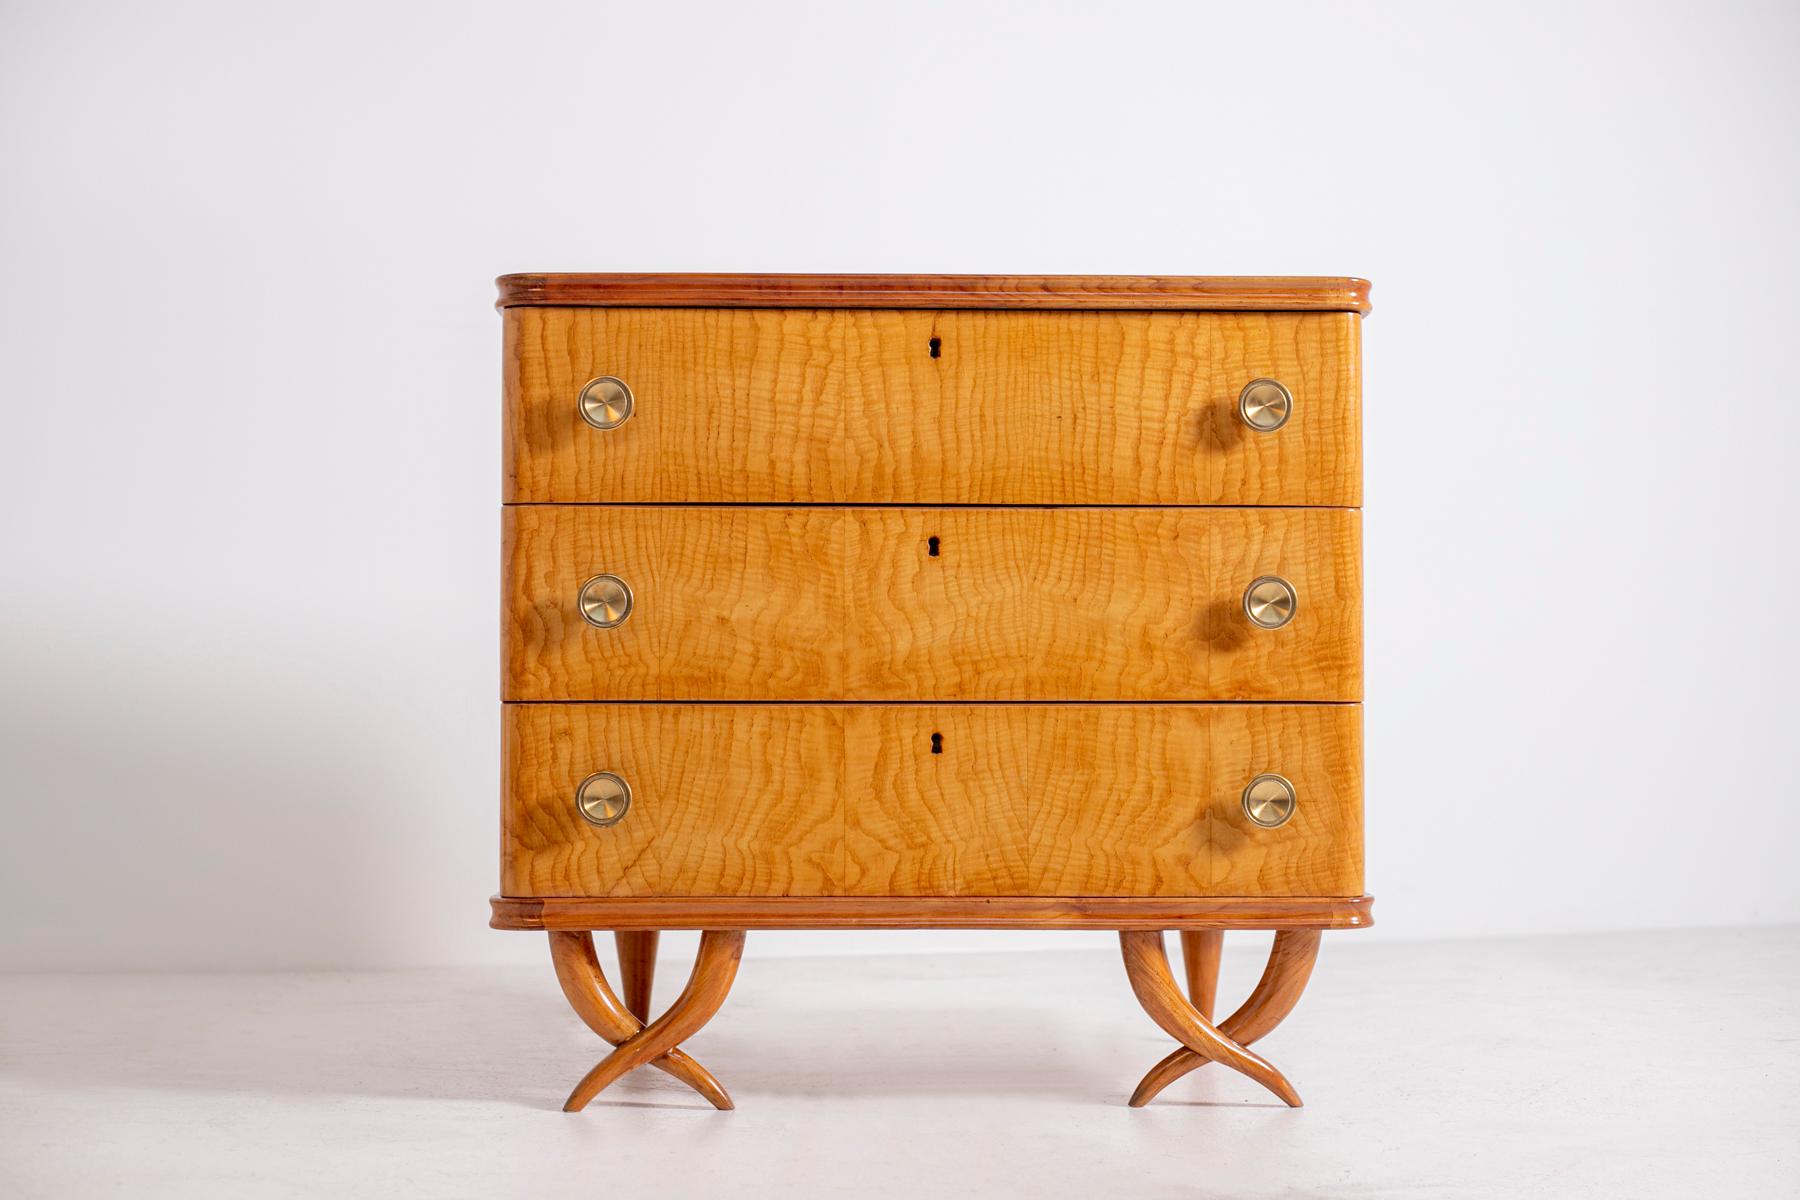 Elegant and Classic Italian chest of drawers by Paolo Buffa, circa 1950. The chest of drawers is in well made walnut wood. The chest of drawers has 3 drawers that can be pulled out through two brass knobs on each side. In the middle we find the